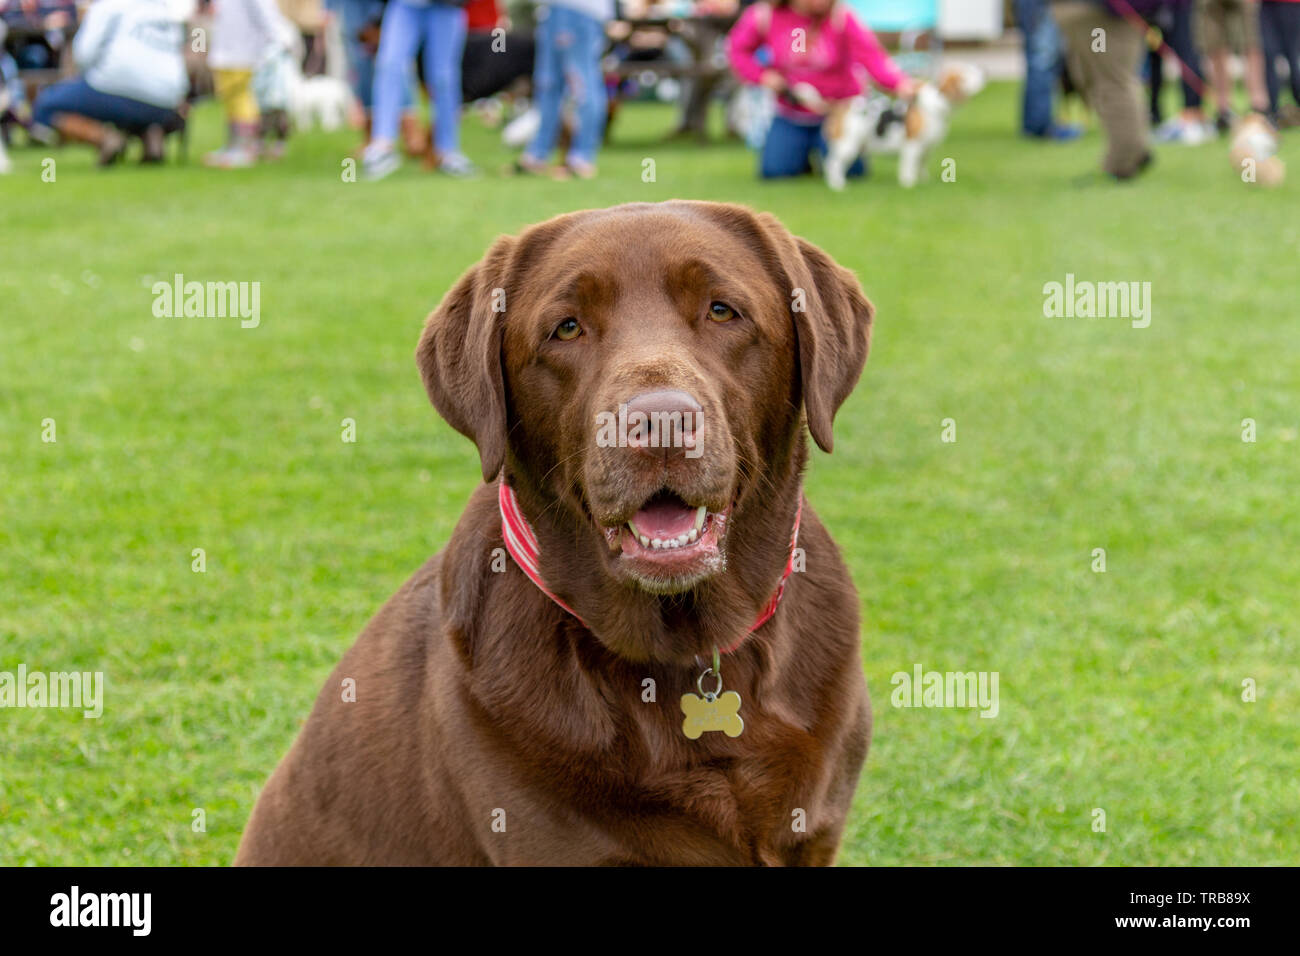 Chocolate brown labrador dog with happy expression, sitting on grass. Stockport, Cheshire, UK. Stock Photo